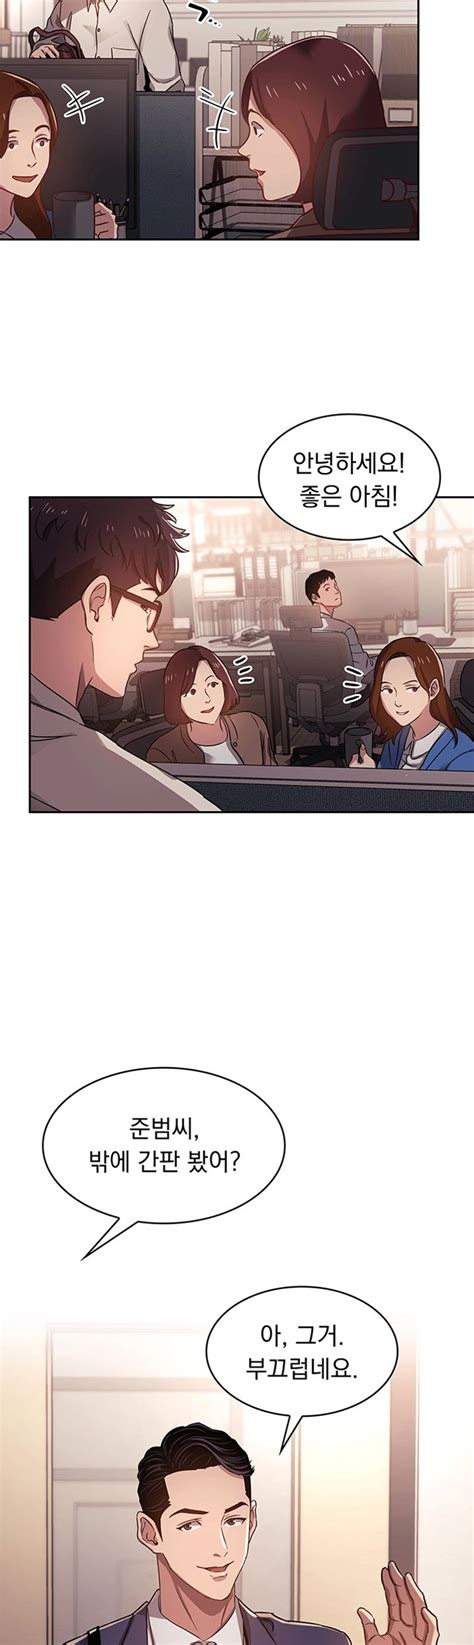 Mother hunting webtoon is about drama, mature, romance story. mother hunting raw